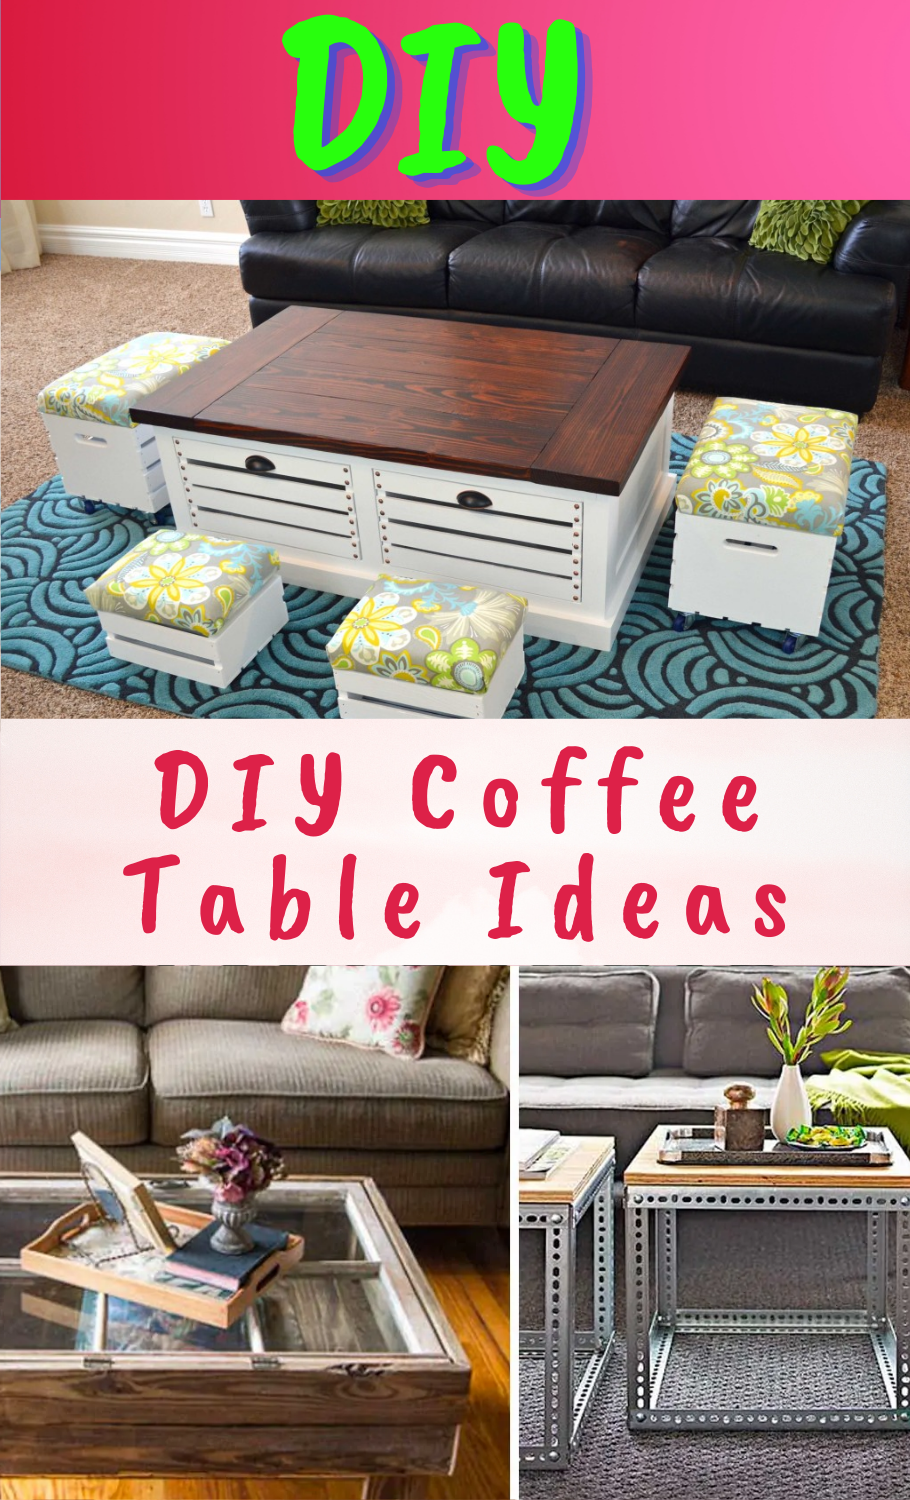 DIY Coffee Table Ideas - DIY Coffee Table Ideas -   21 diy Table upcycle ideas